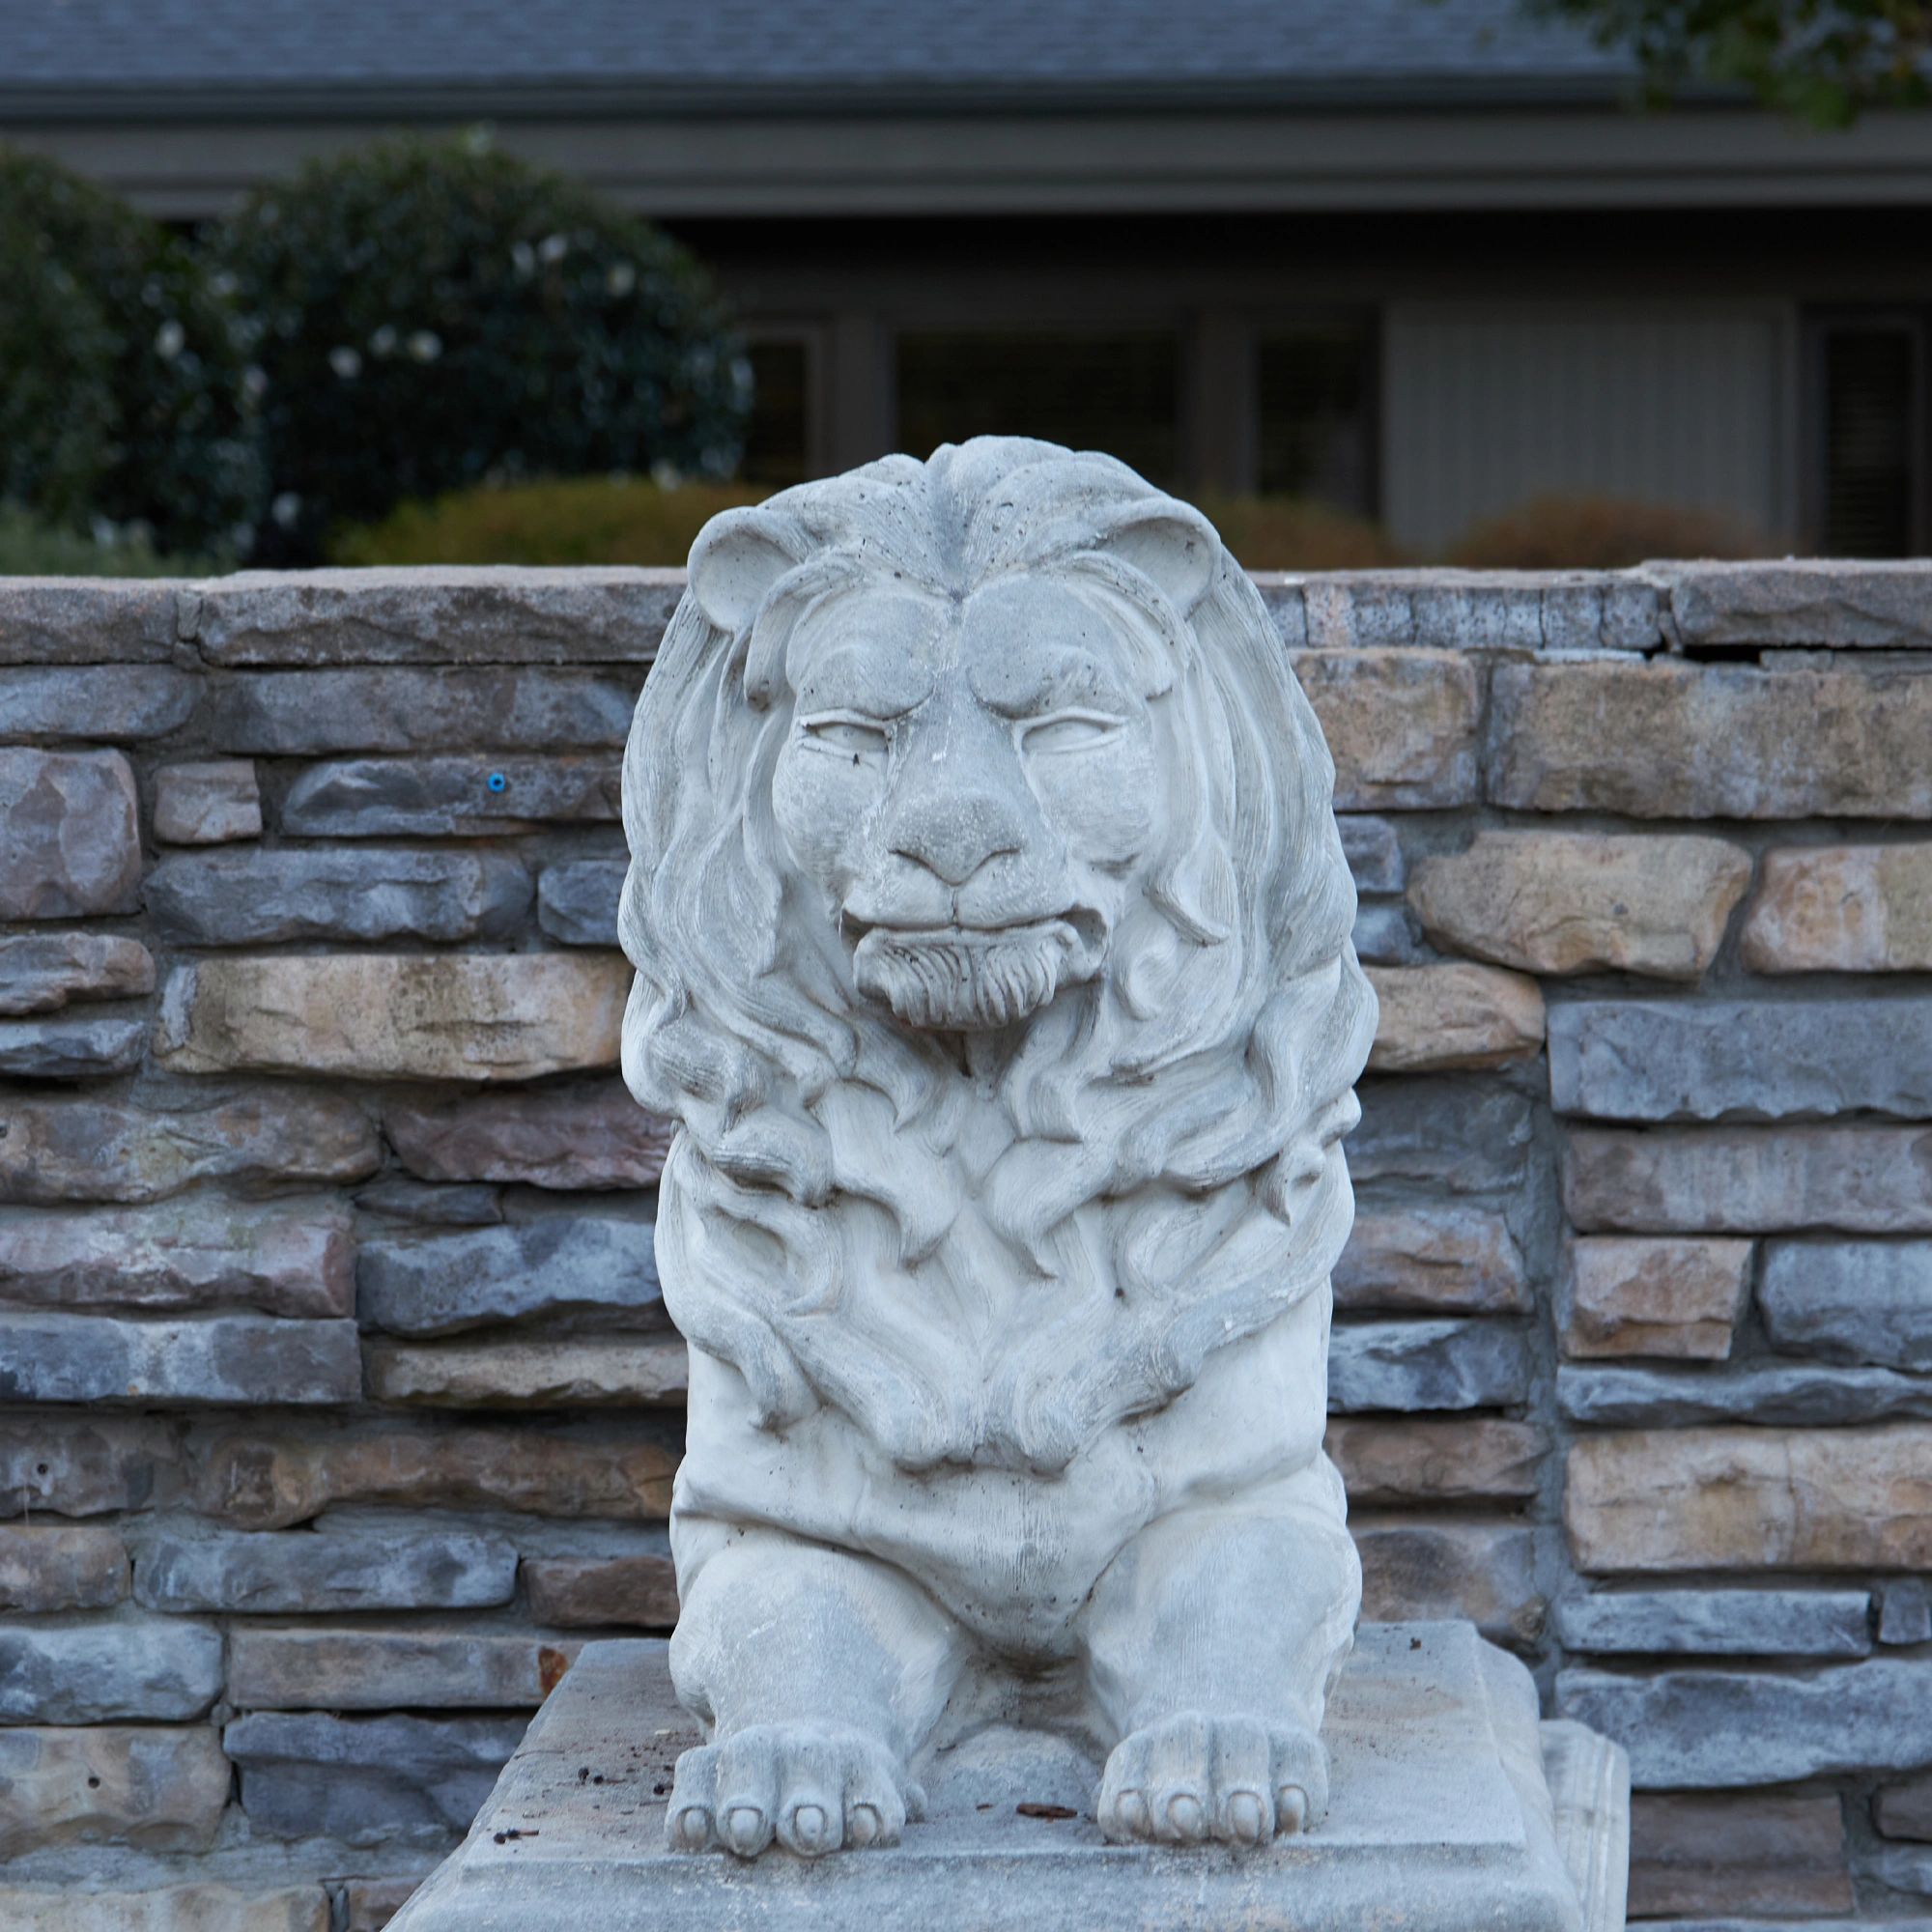 Mitch the Lion at The Mitchell Academy
Dearborn Education